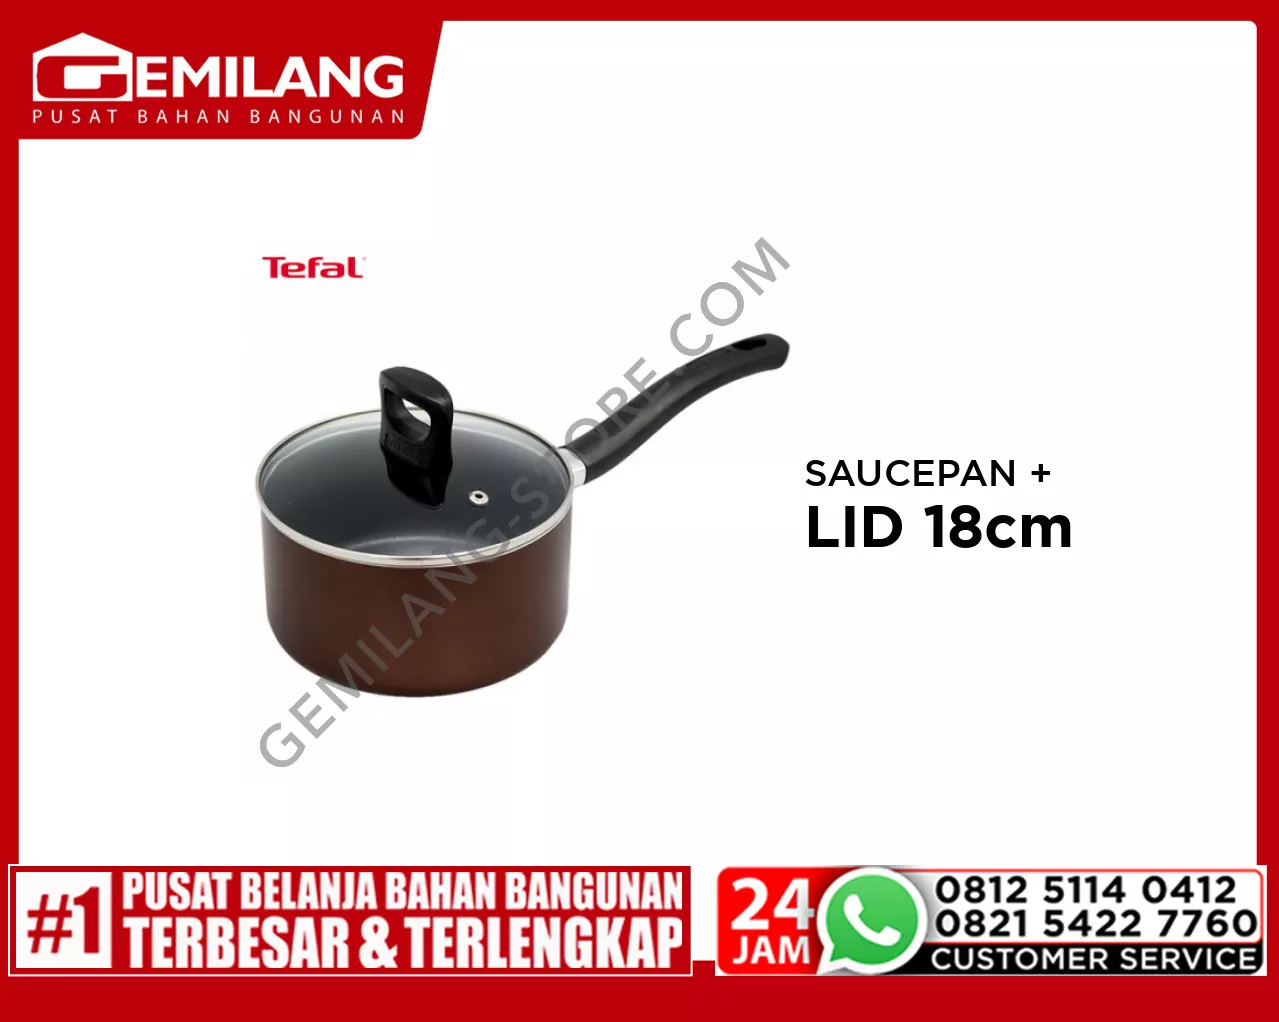 TEFAL DAY BY DAY SAUCEPAN + LID 18cm